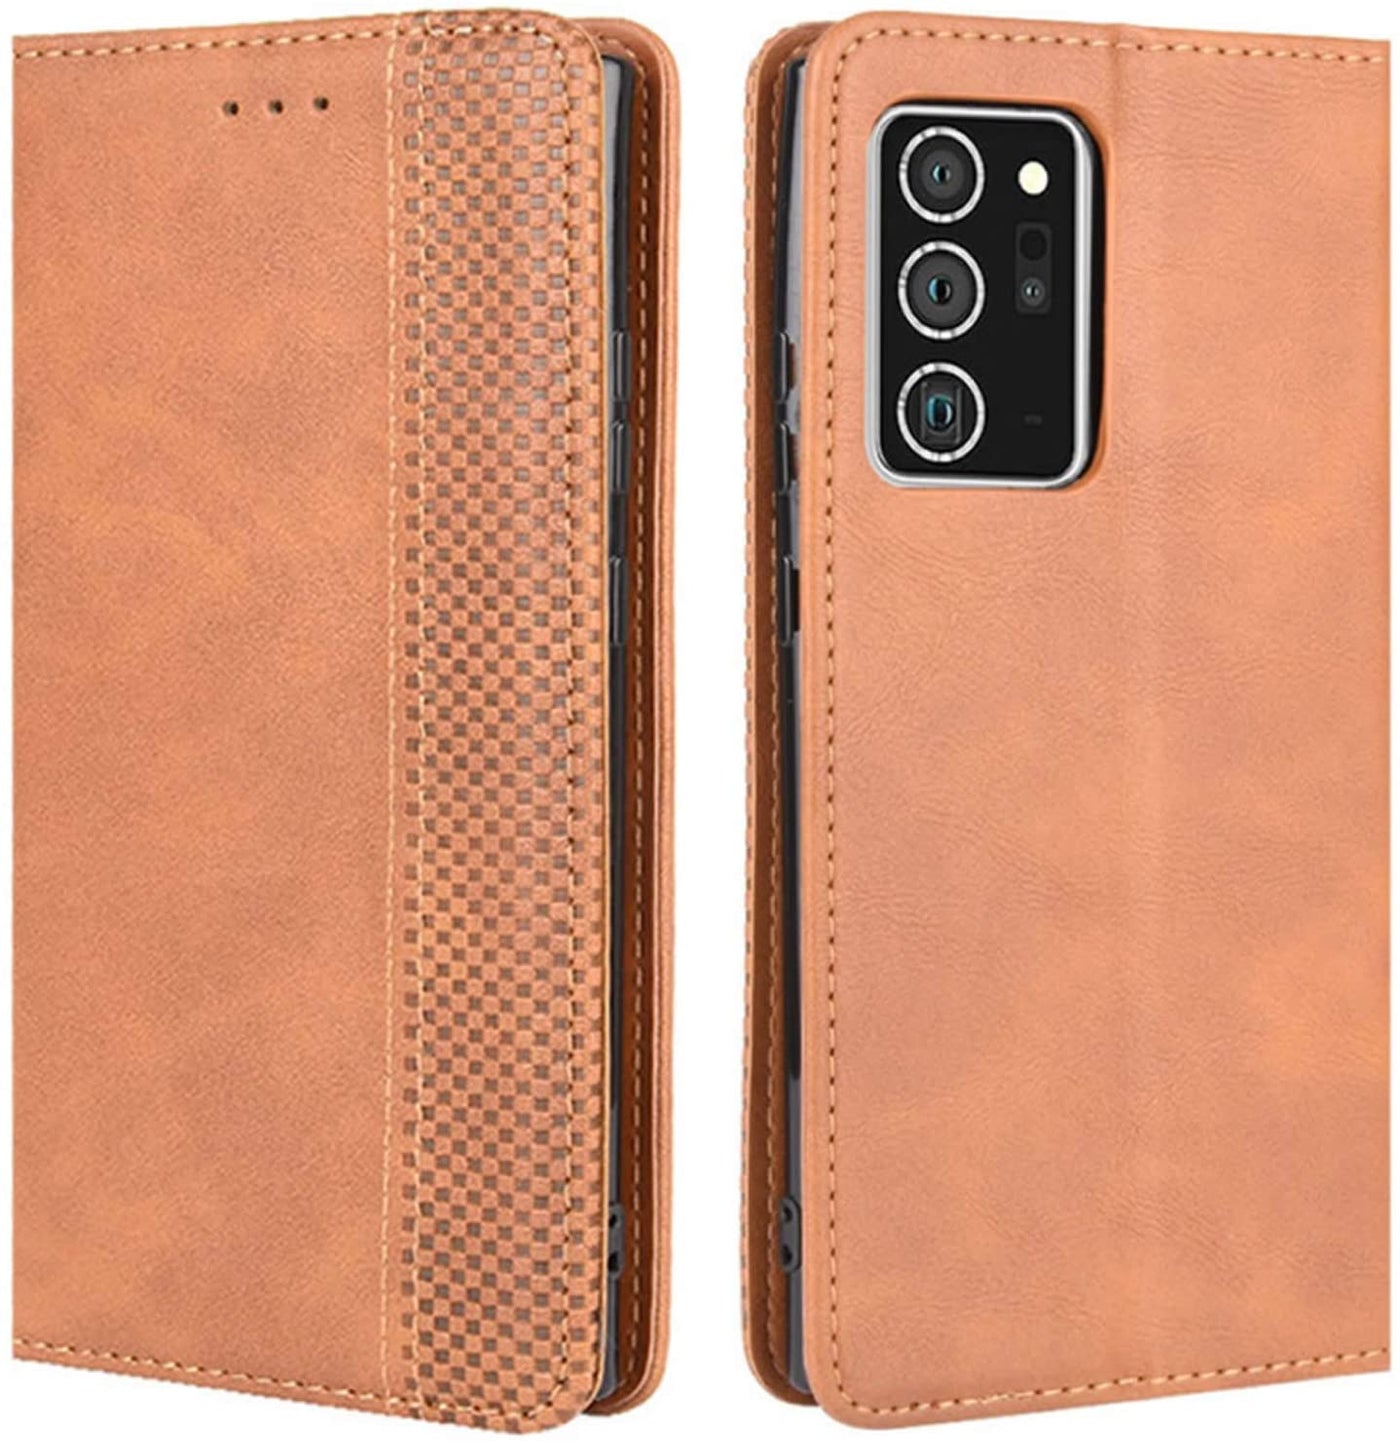 Samsung Galaxy Note 20 Ultra brown color leather wallet flip cover case By excelsior